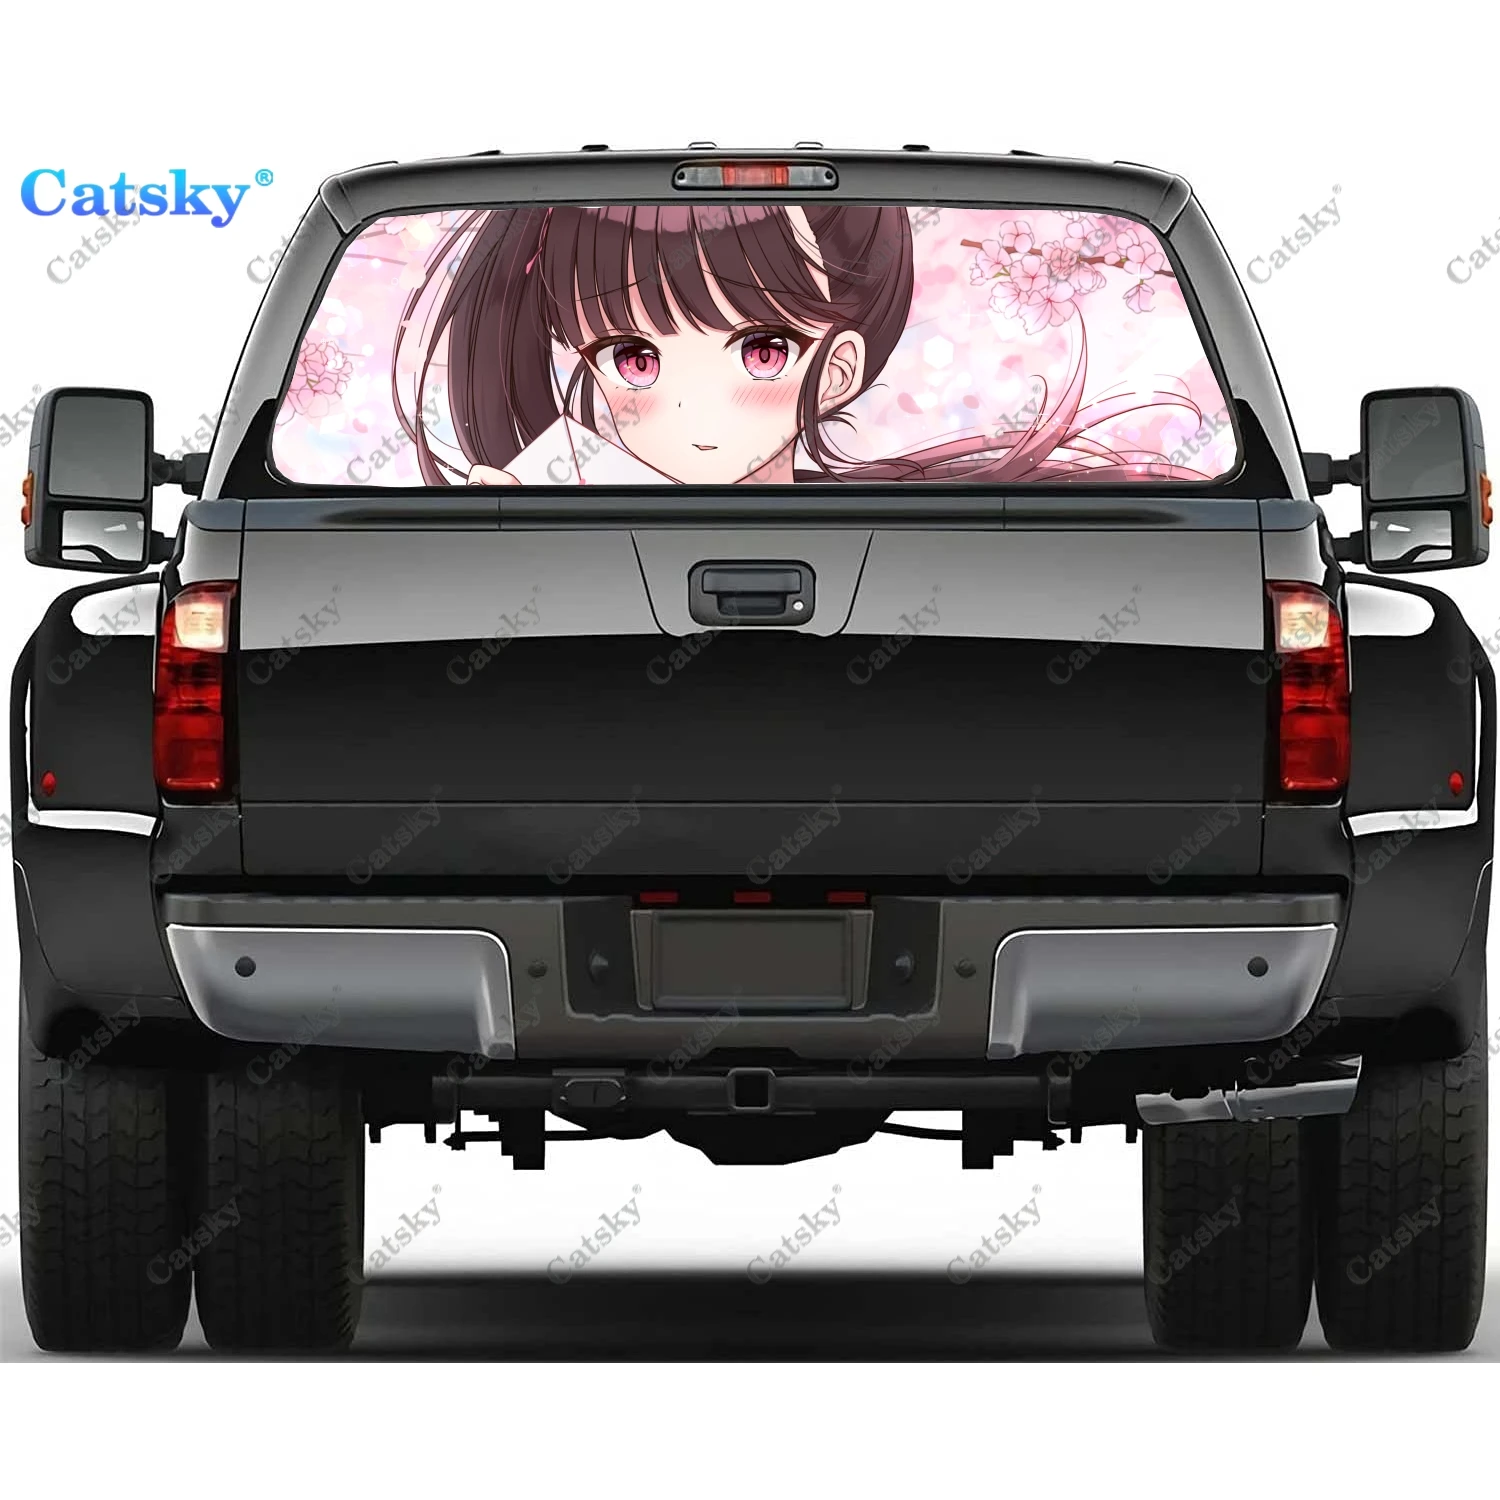 

Demon Slayer Anime Printing Rear Window Sticker Windshield Decal Truck Rear Window Decal Universal Tint Perforated Vinyl Graphic